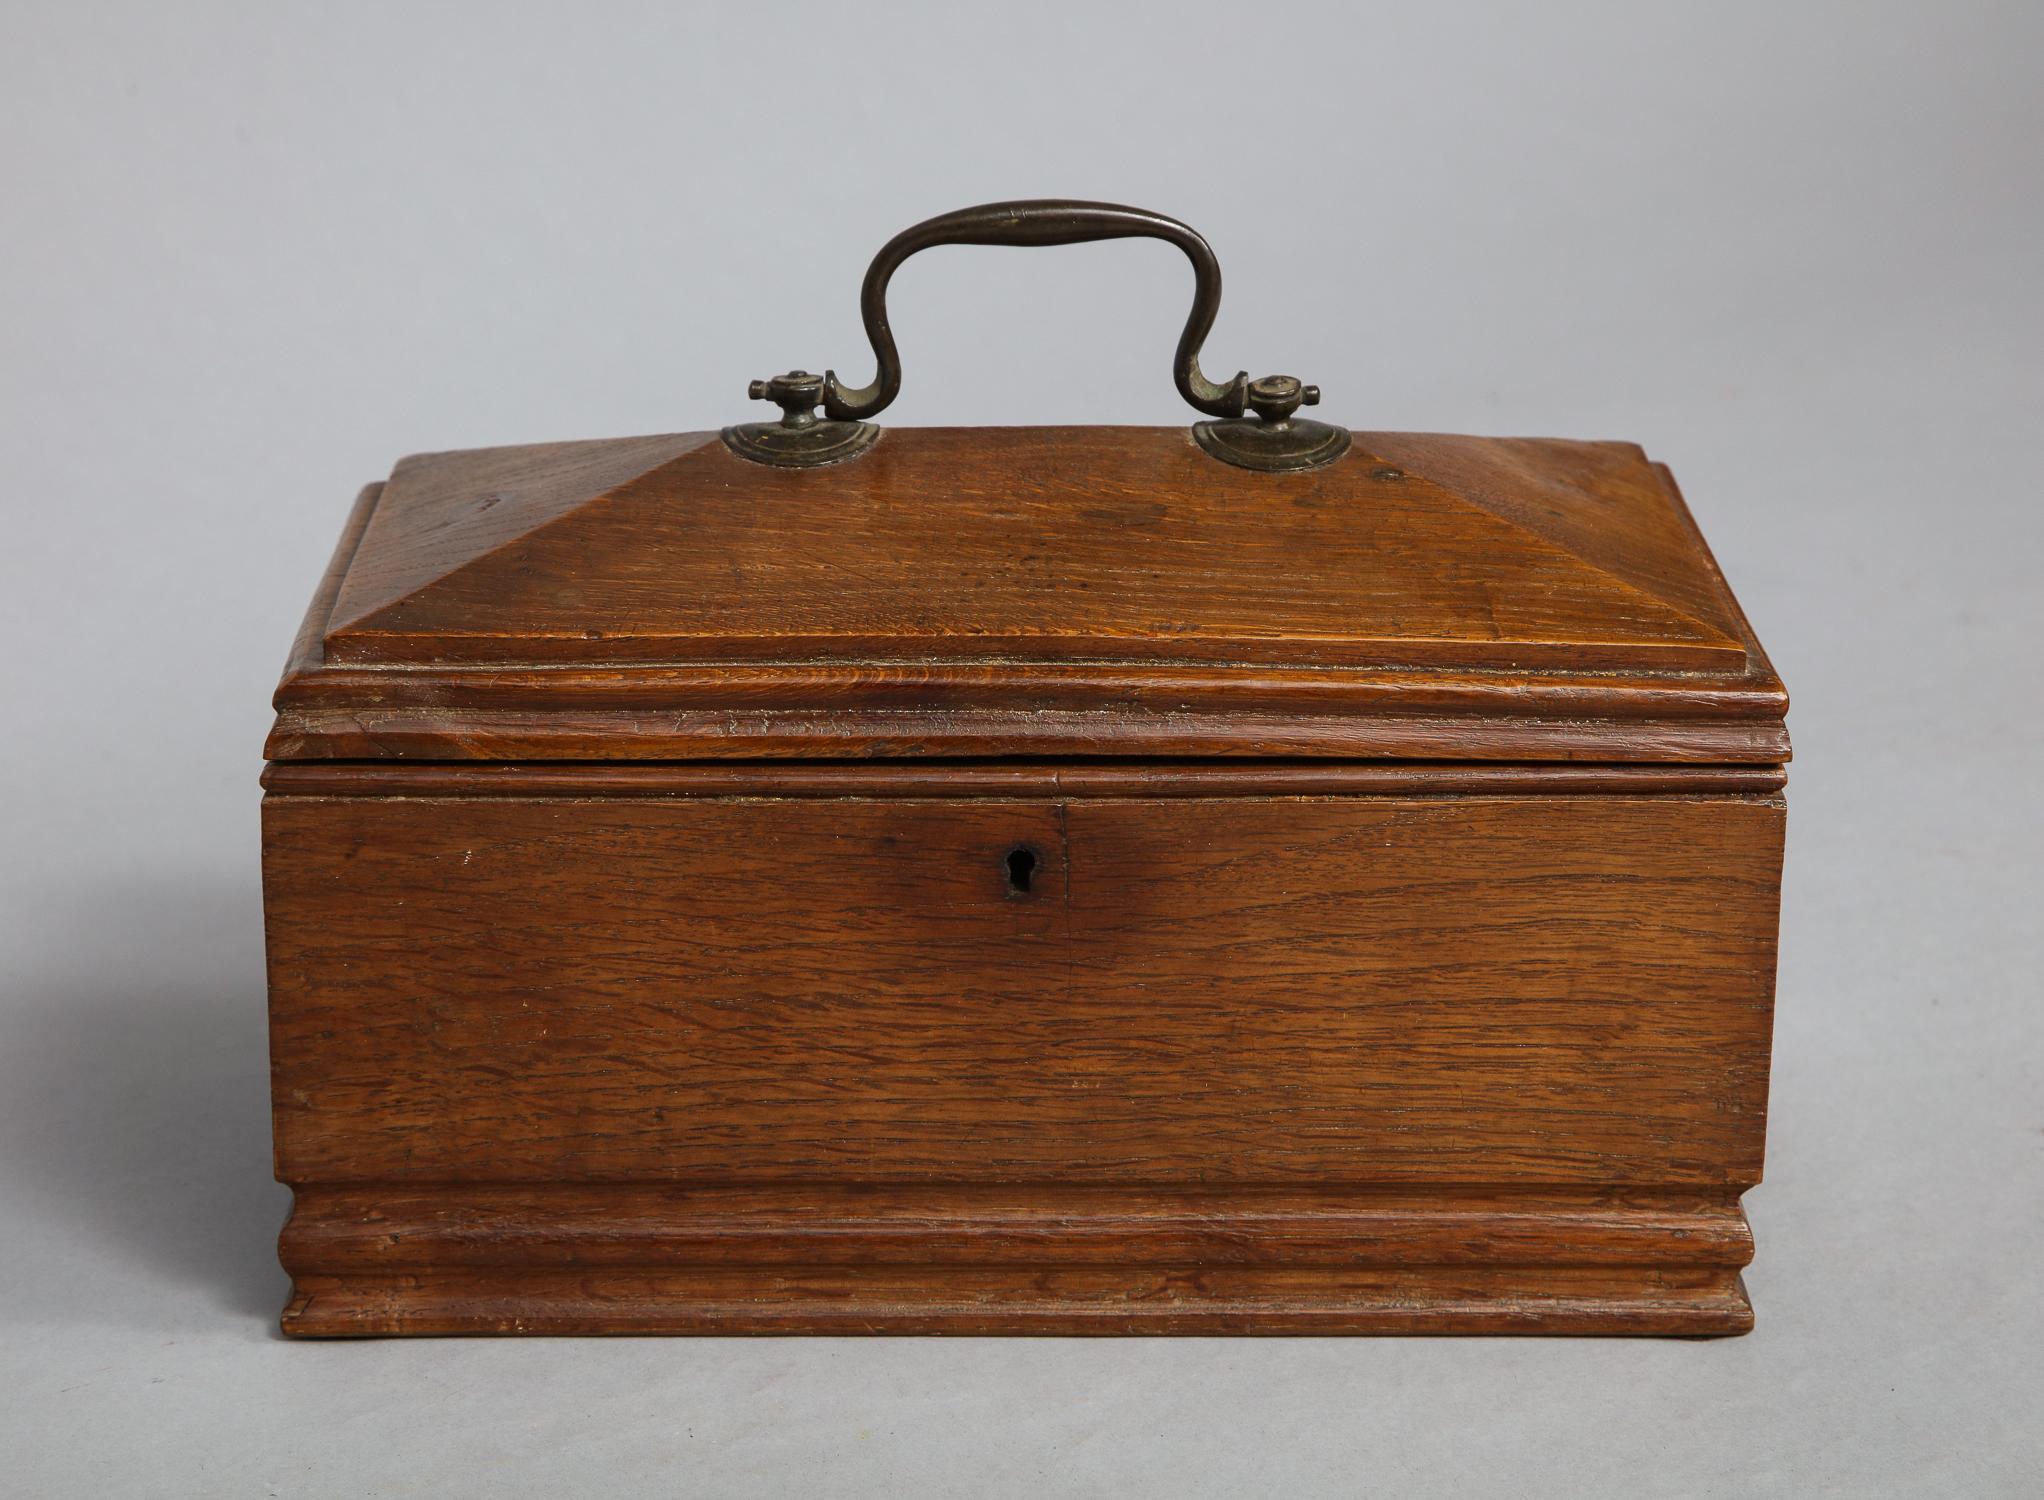 Most unusual Georgian oak tea caddy fashioned from a single block of timber, hollowed out from the inside, retaining original gilt lacquer brass handle and iron lock, the whole with pleasing patina.